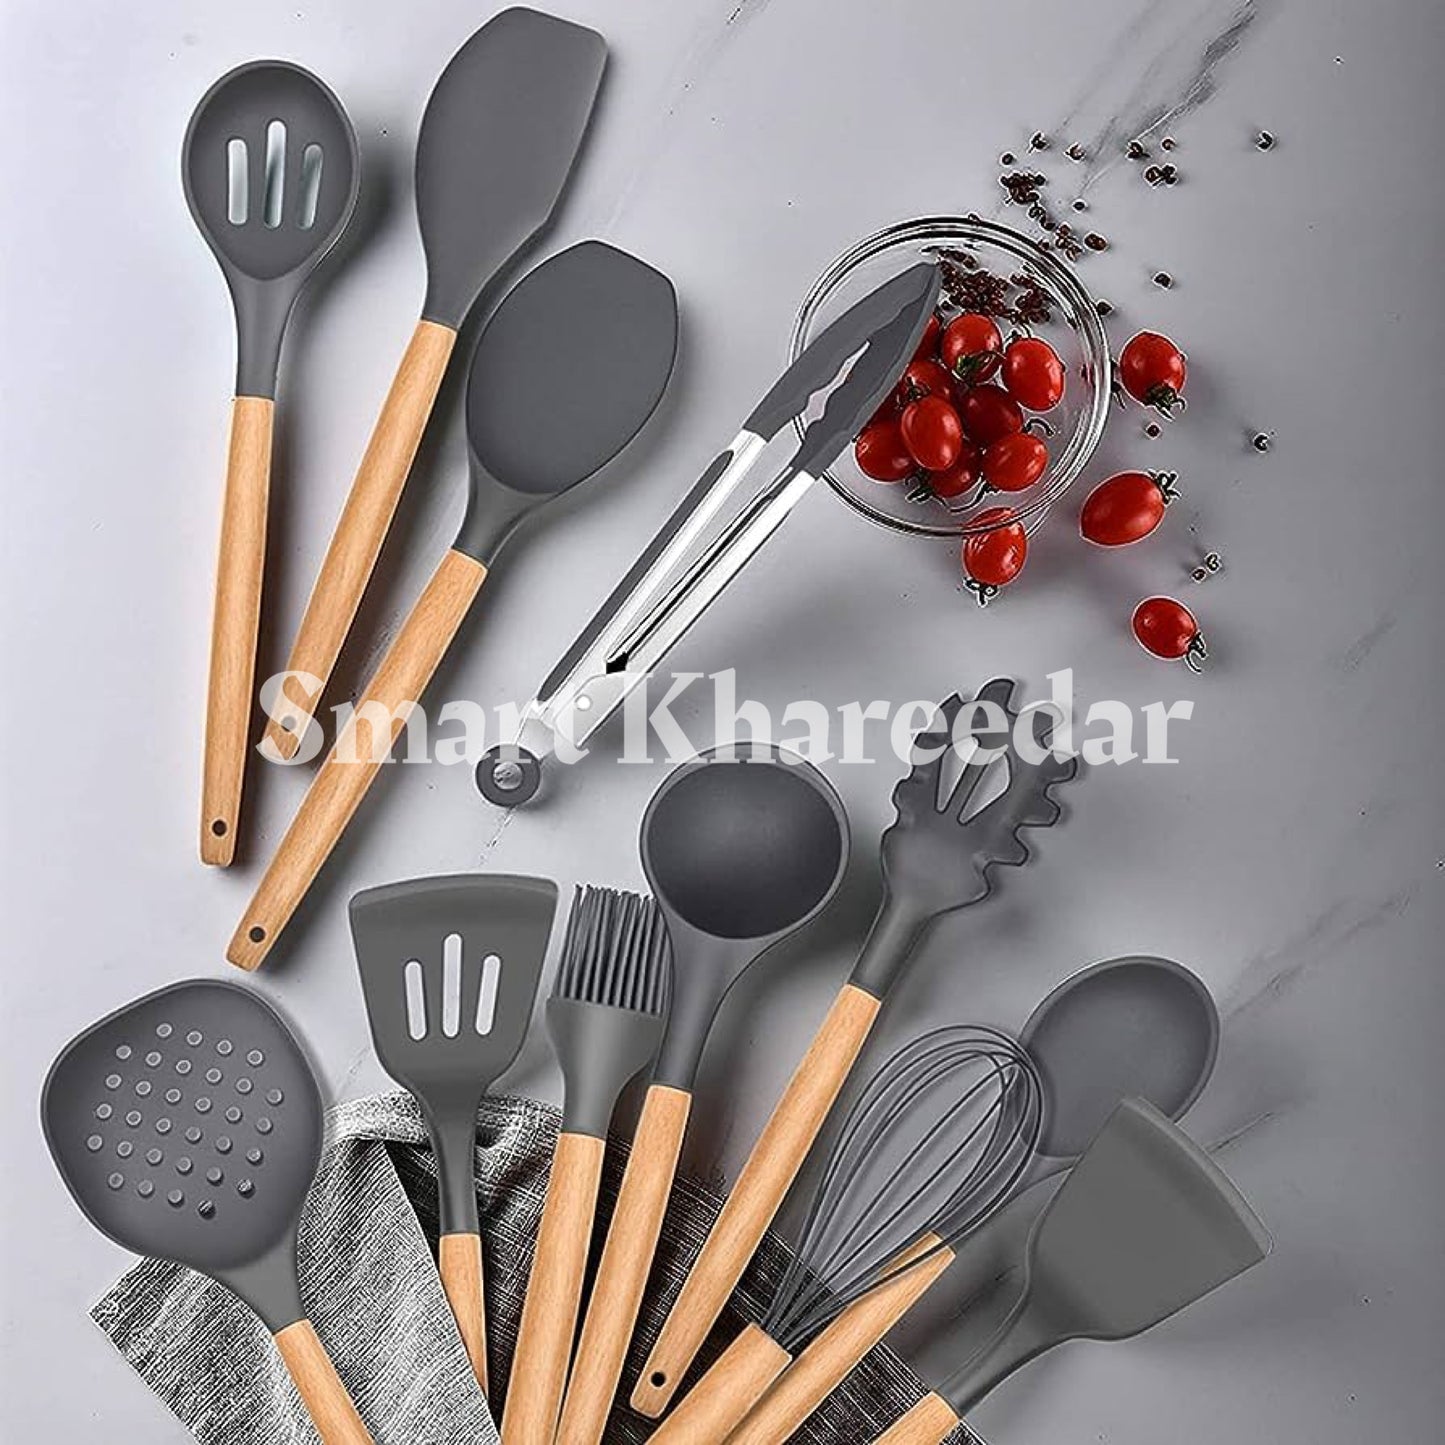 12 pcs Silicone Cooking Spoon Set with stand